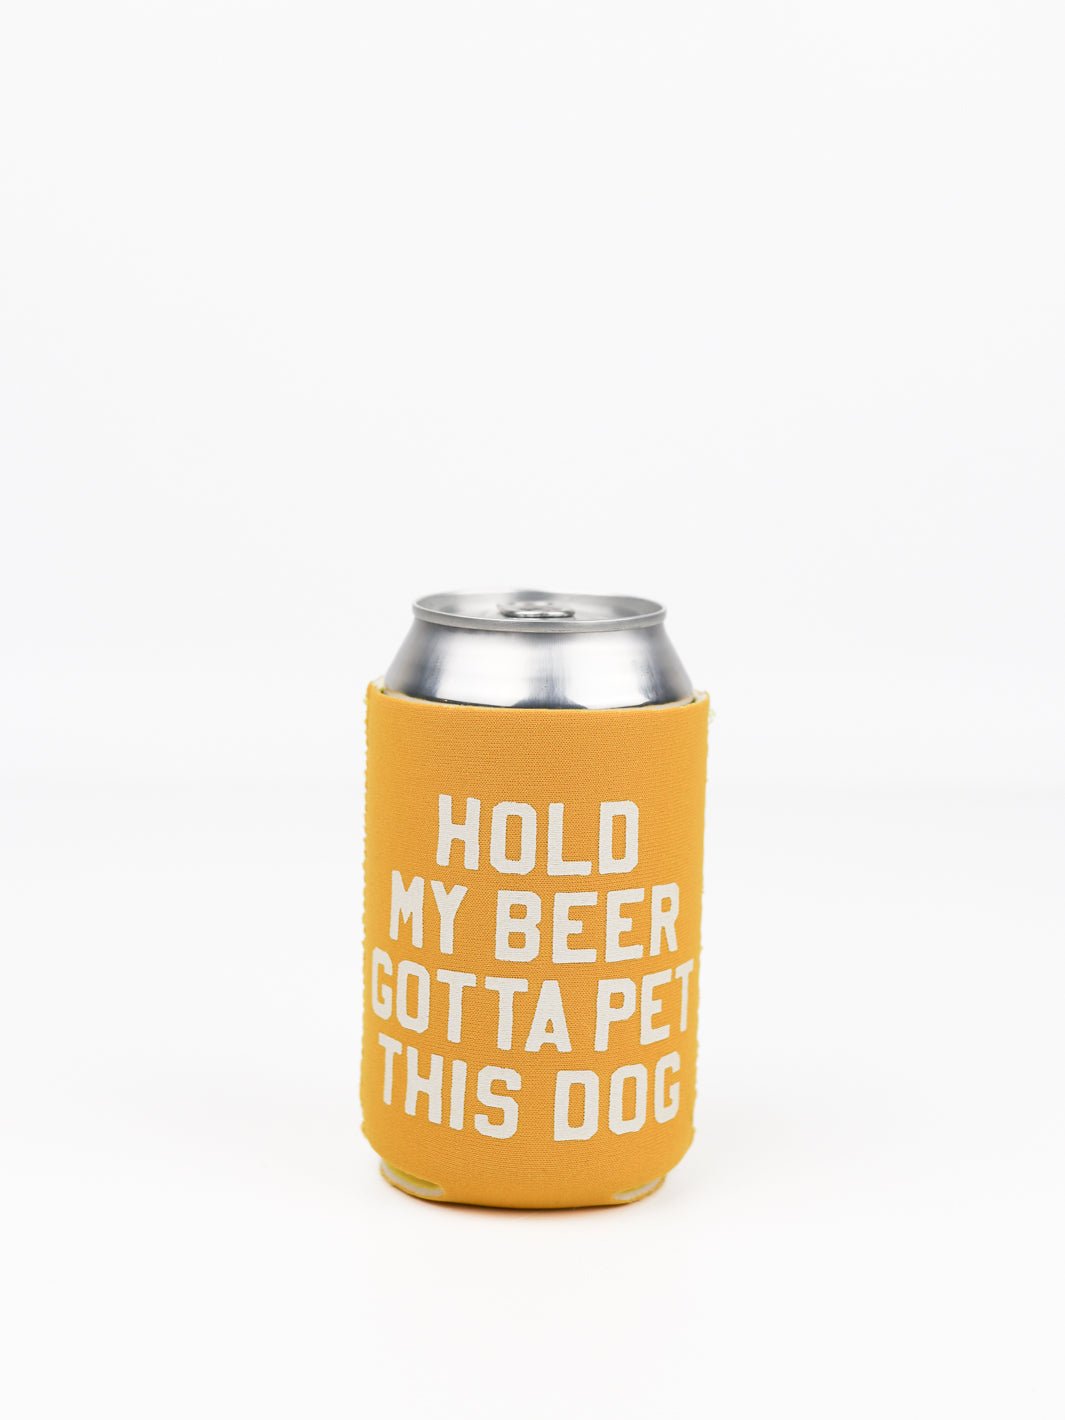 Hold My Beer Gotta Pet This Dog Coozie - Heyday